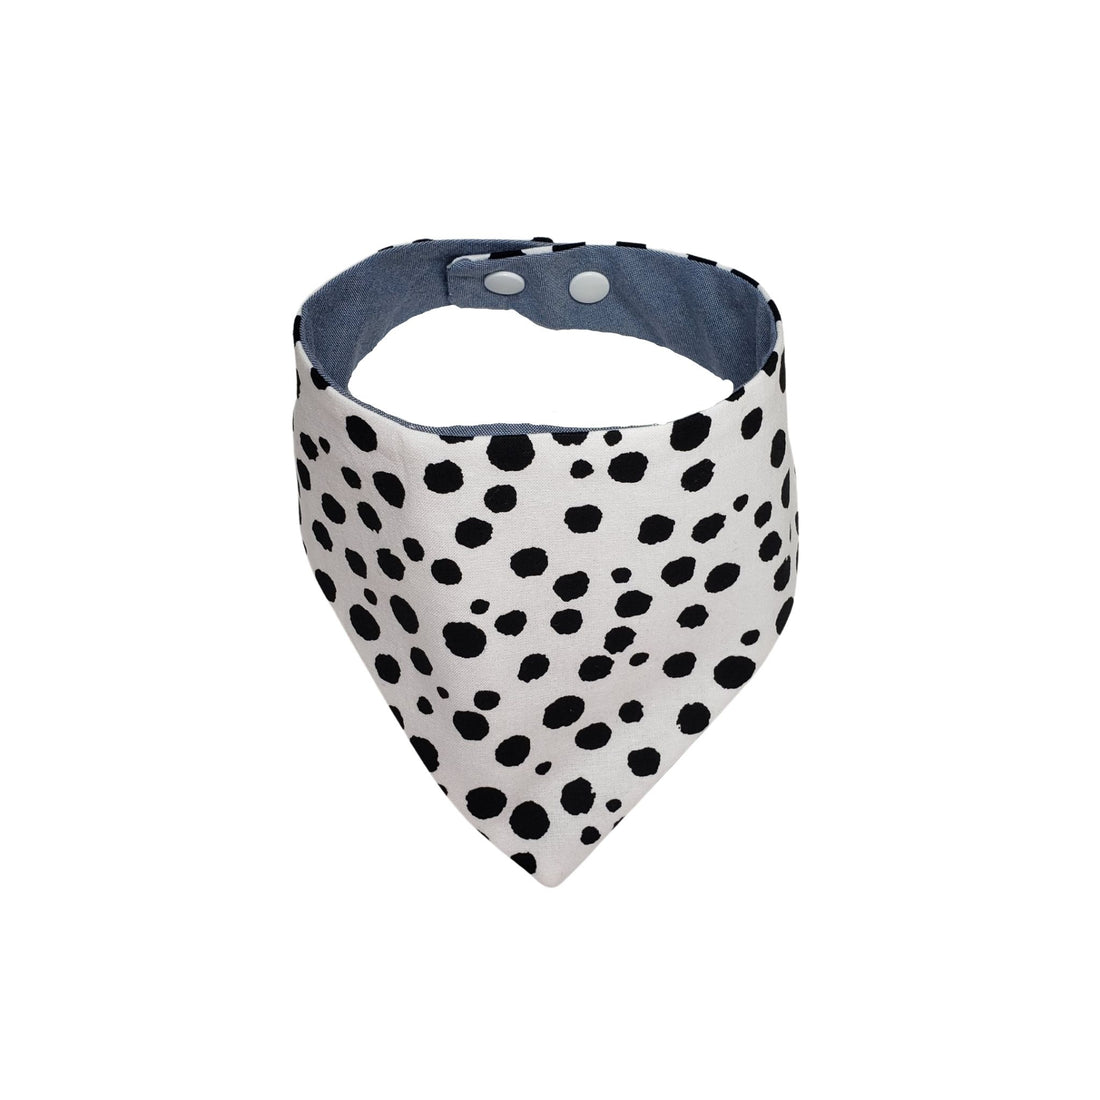 Black and White spotted reversible to blue chambray dog bandana with snaps. - Life Has Just Begun